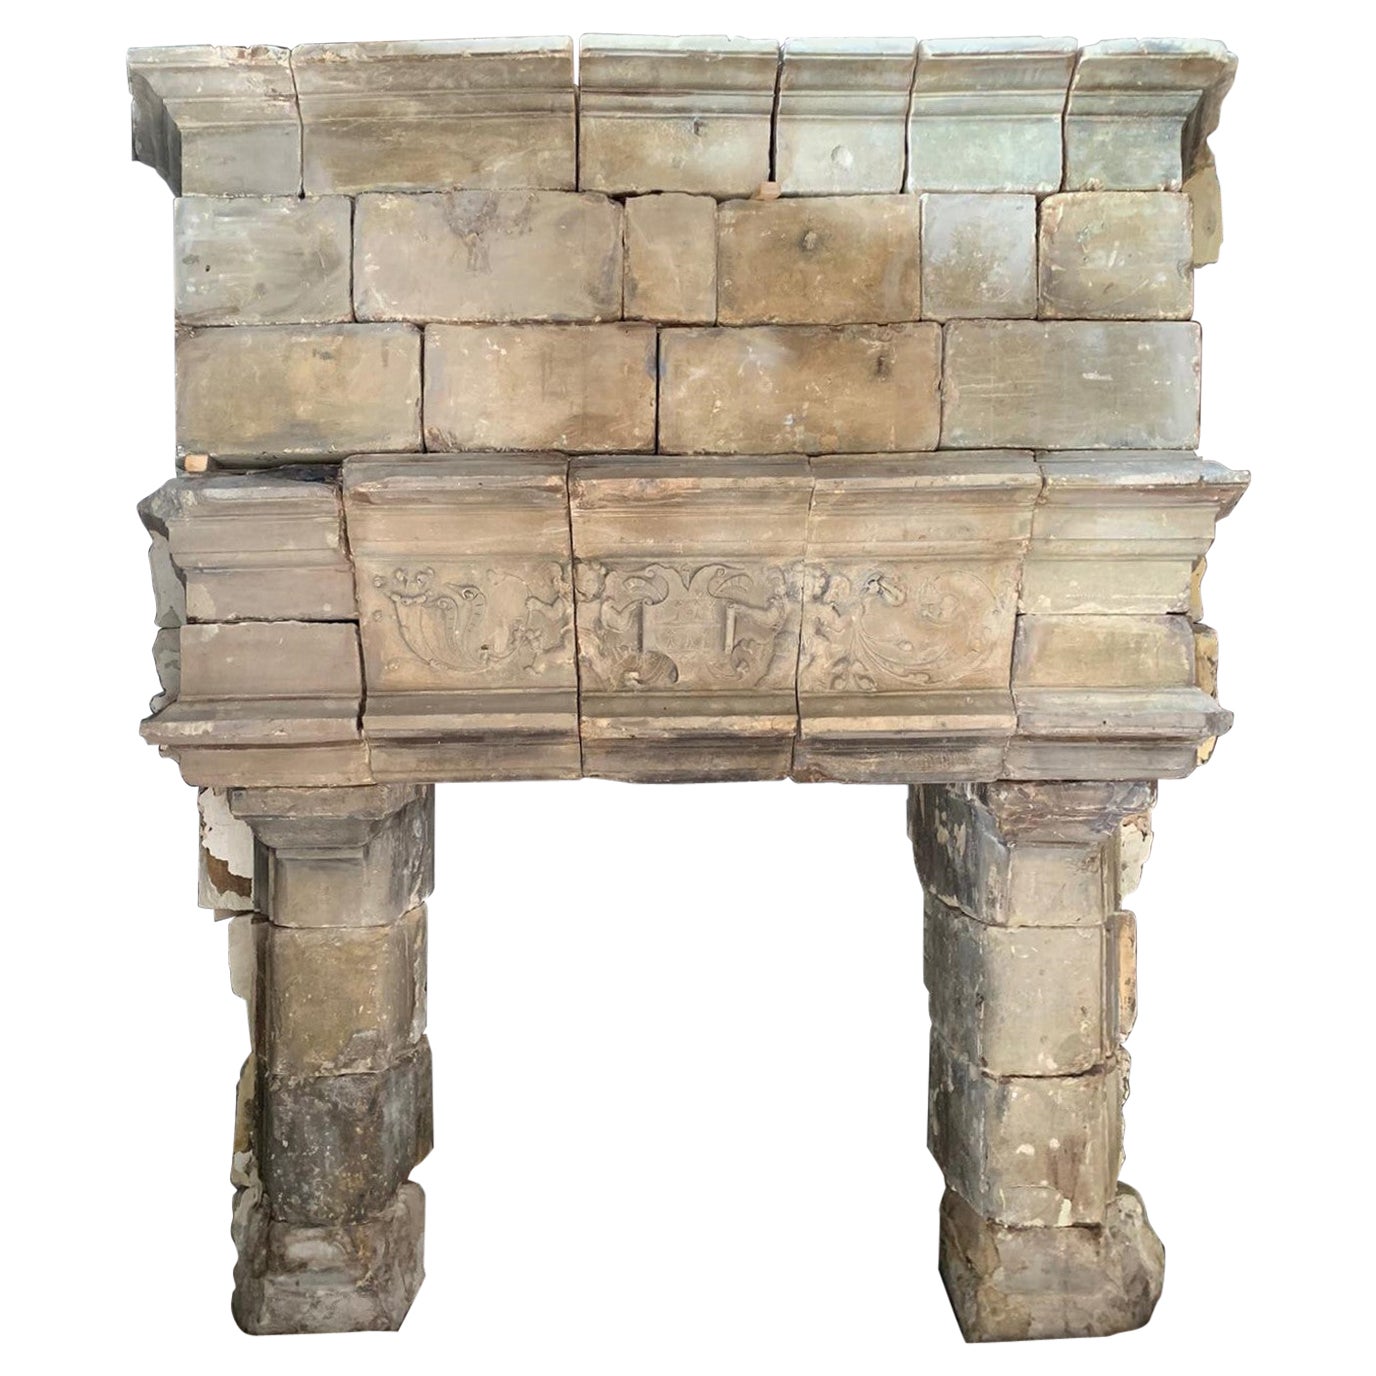 Antique and Important, Large Fireplace in Burgundy Stone, 16th Century France